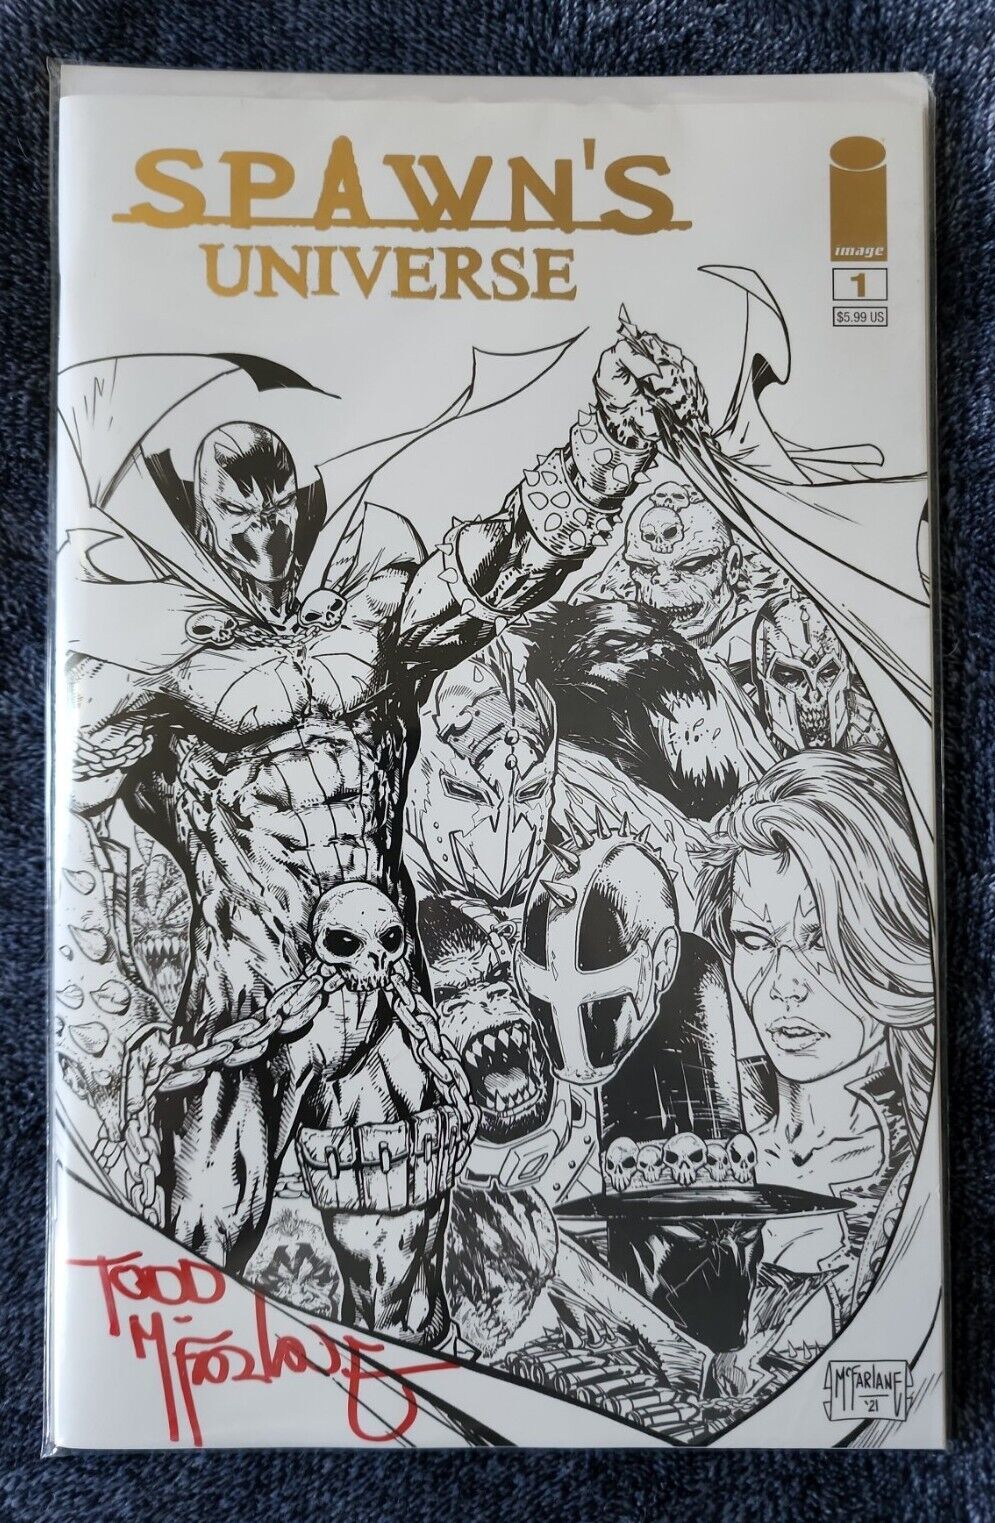 SPAWN'S UNIVERSE #1 Signed by Todd McFARLANE GOLD FOIL Variant Sketch NEW & RARE